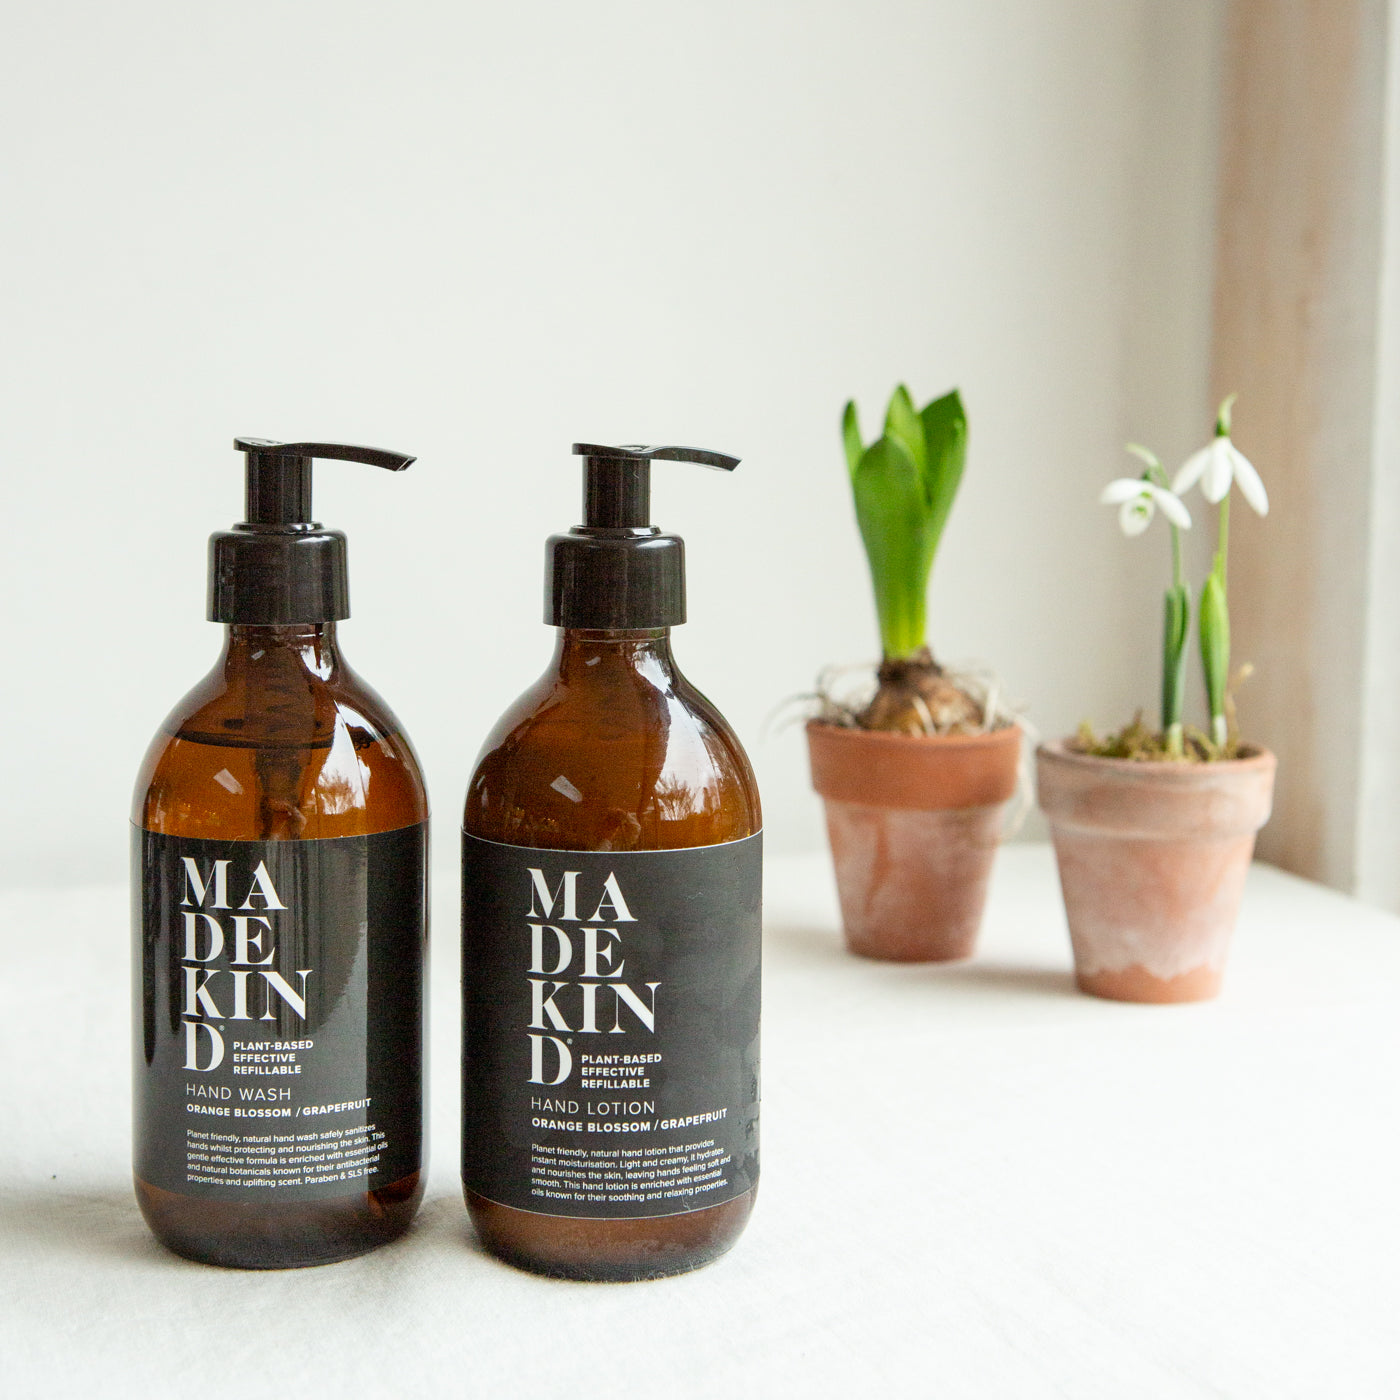 Natural hand wash and hand lotion with orange blossom and grapefruit essential oils